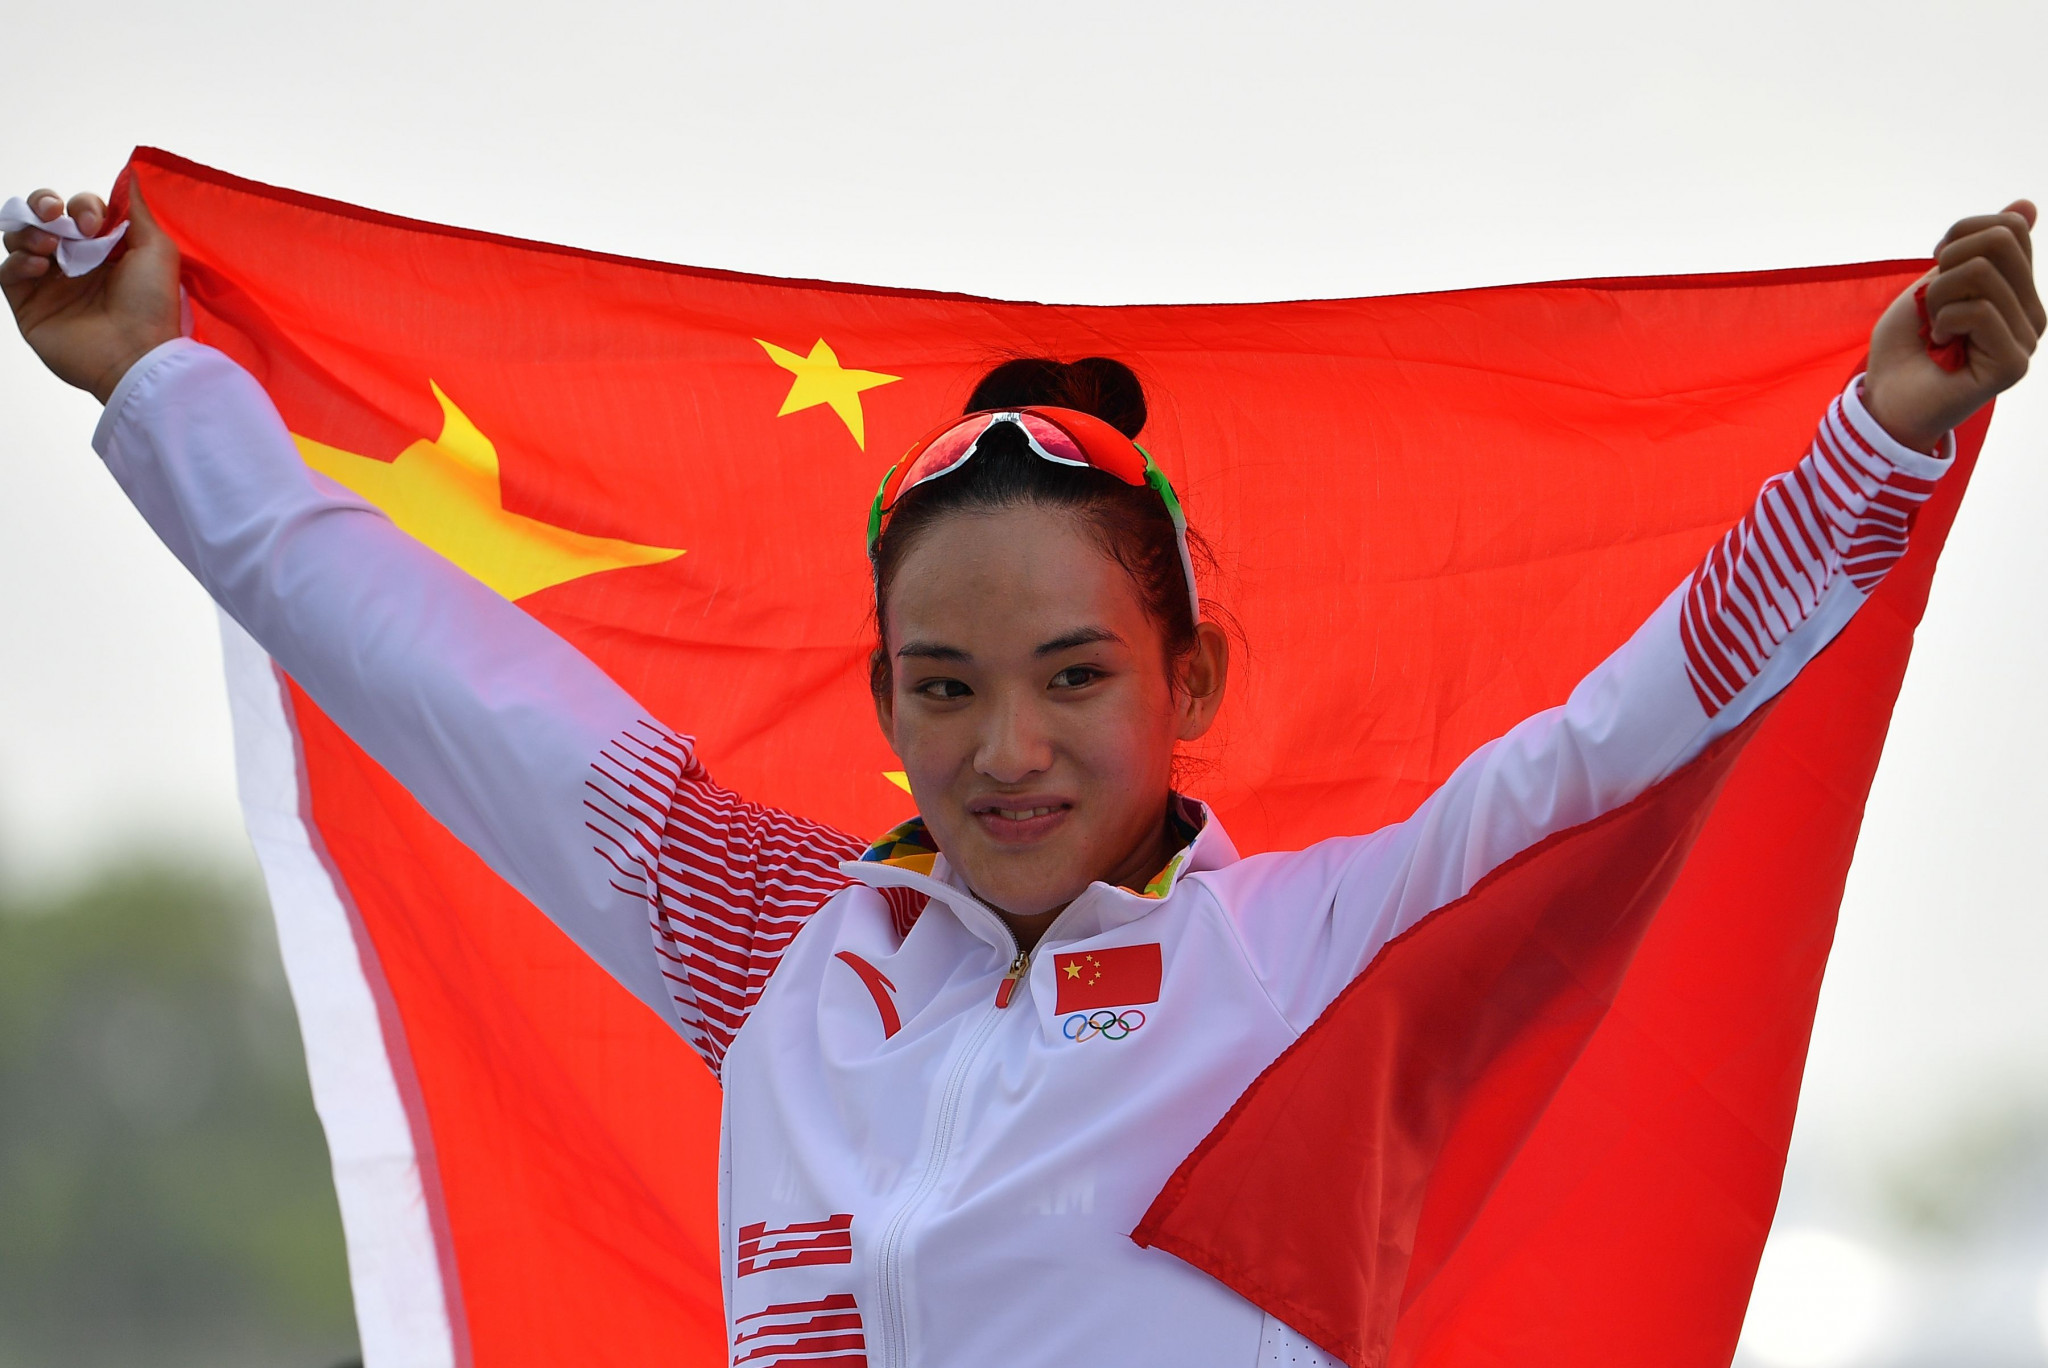 Li Yue secured one of China's four gold medals in canoe/kayak sprint competition by winning the women's K1 500m event ©Getty Images